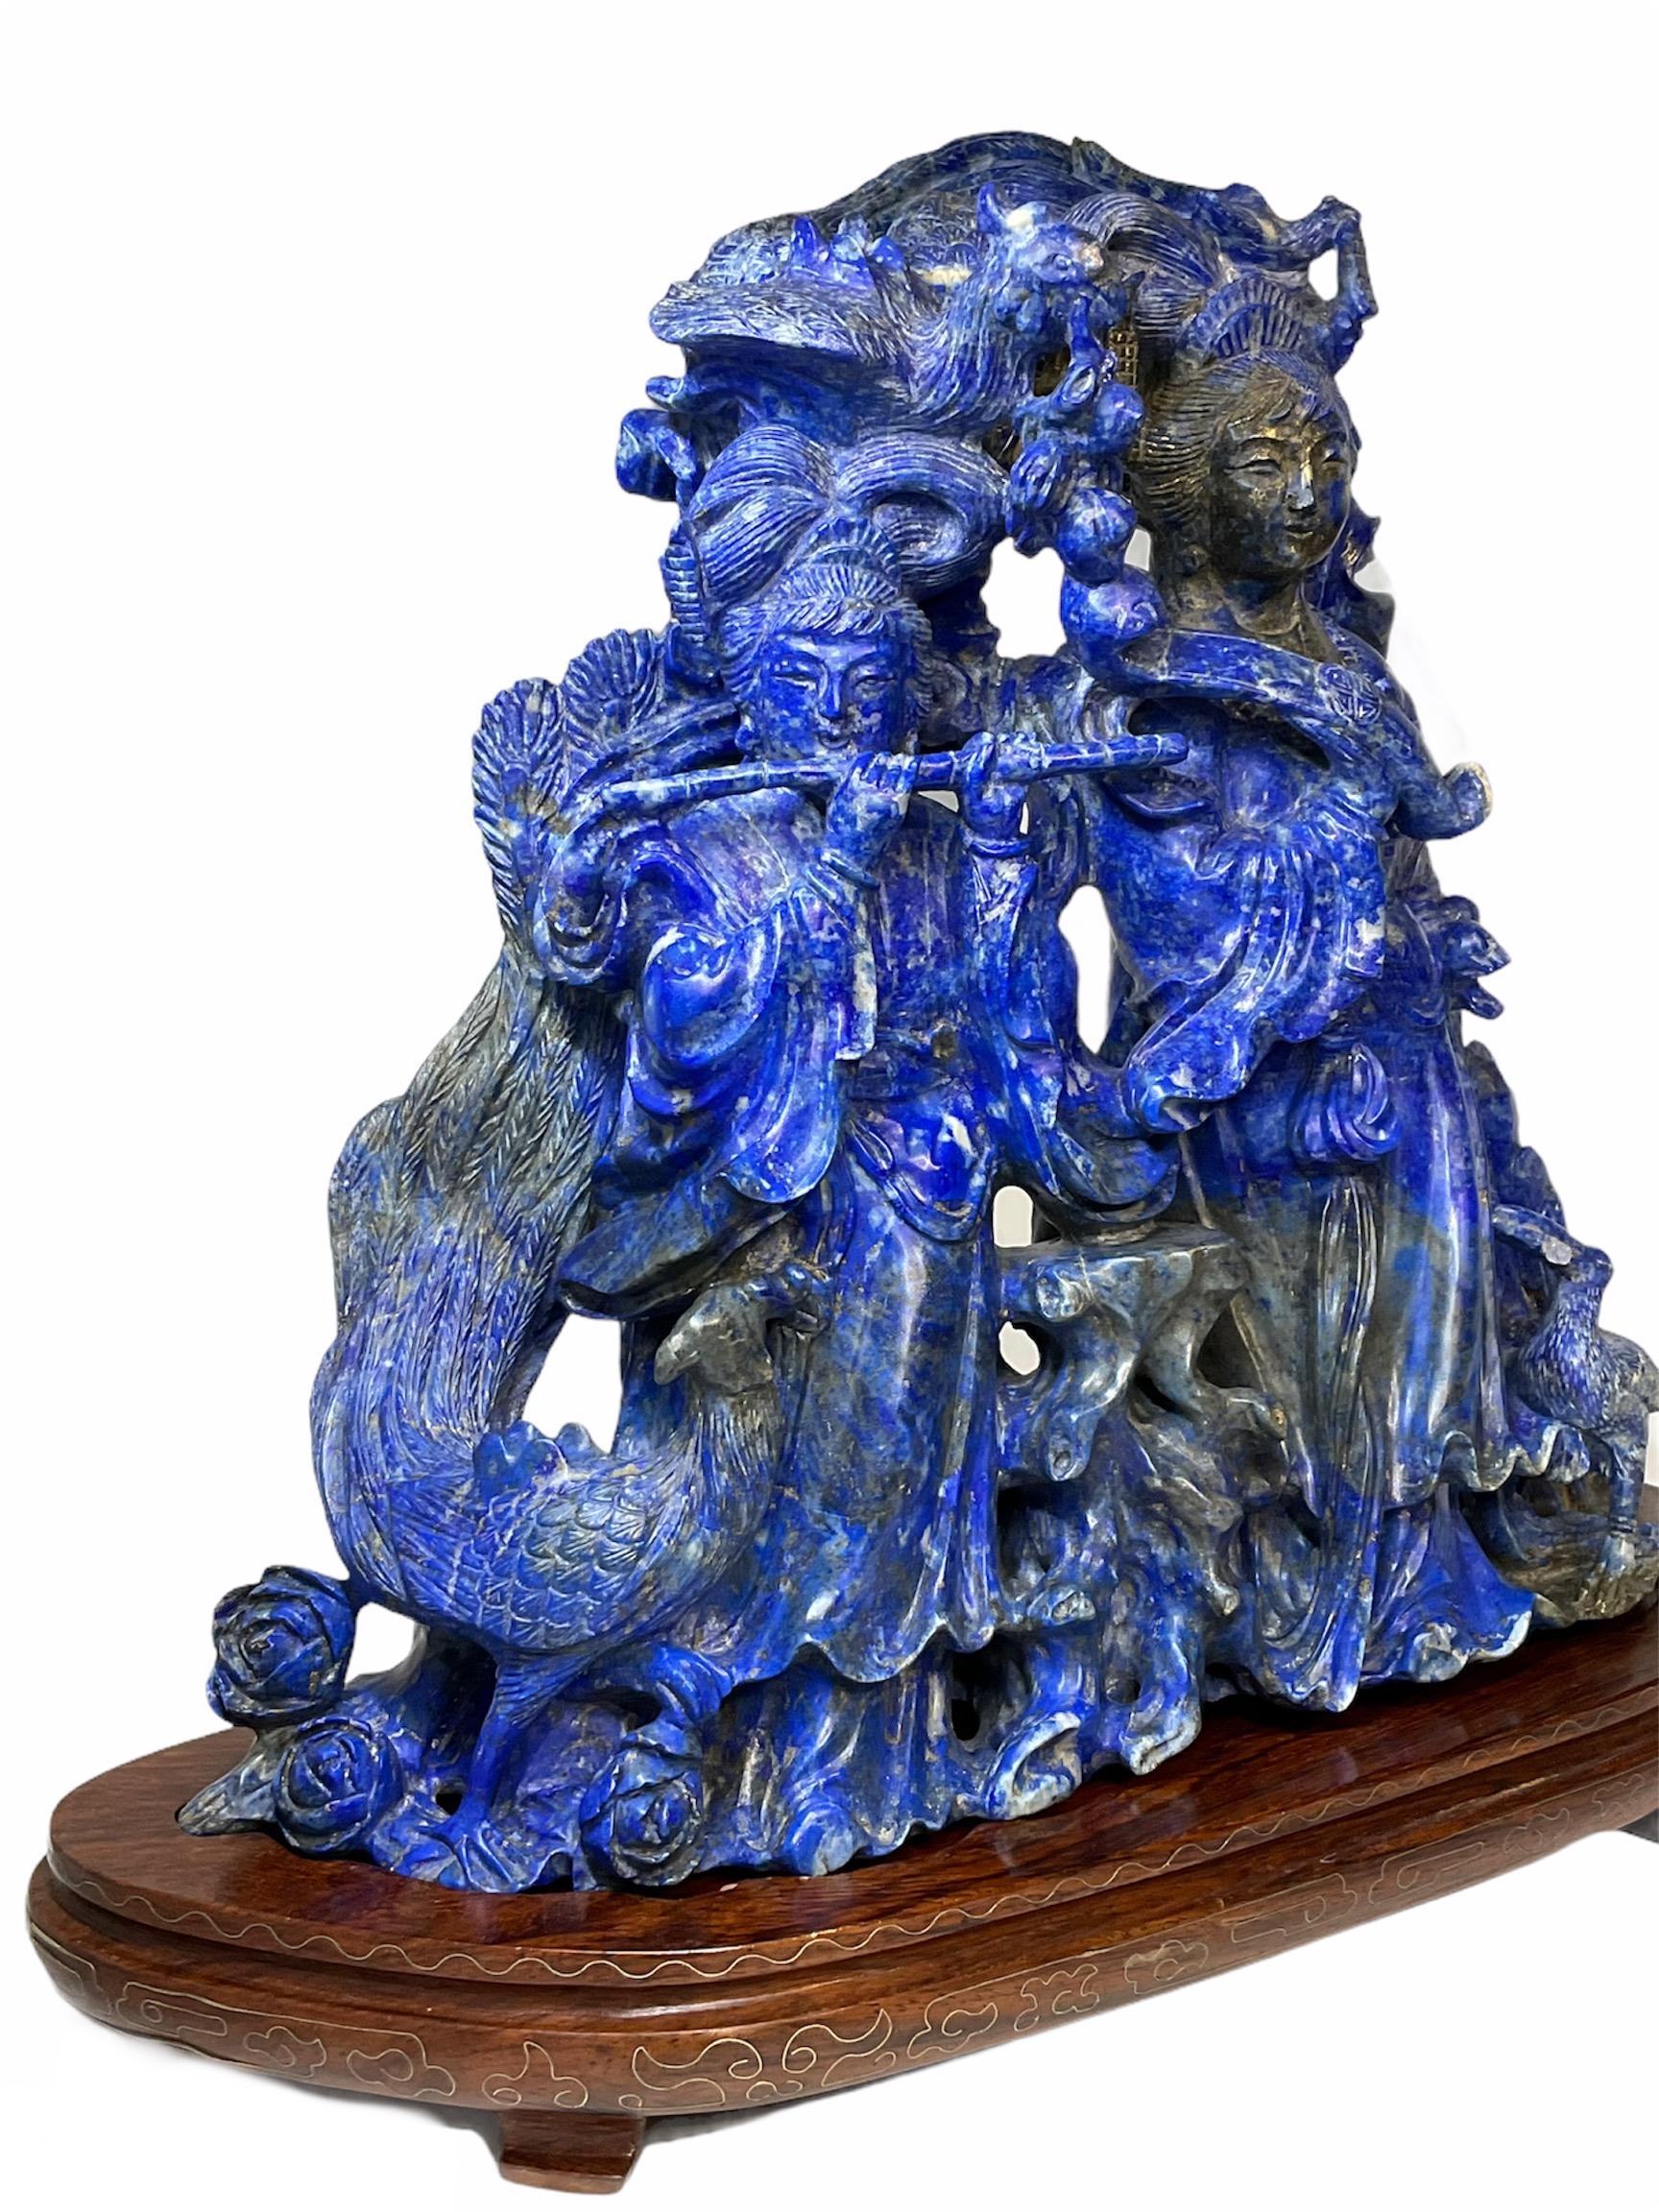 This is a large heavy Chinese lapis lazuli well carved in details group of figures sculpture.`It depicts two young ladies very well dressed in southern and northern dynasty clothes with traditional Chinese hair styles standing up between a tree